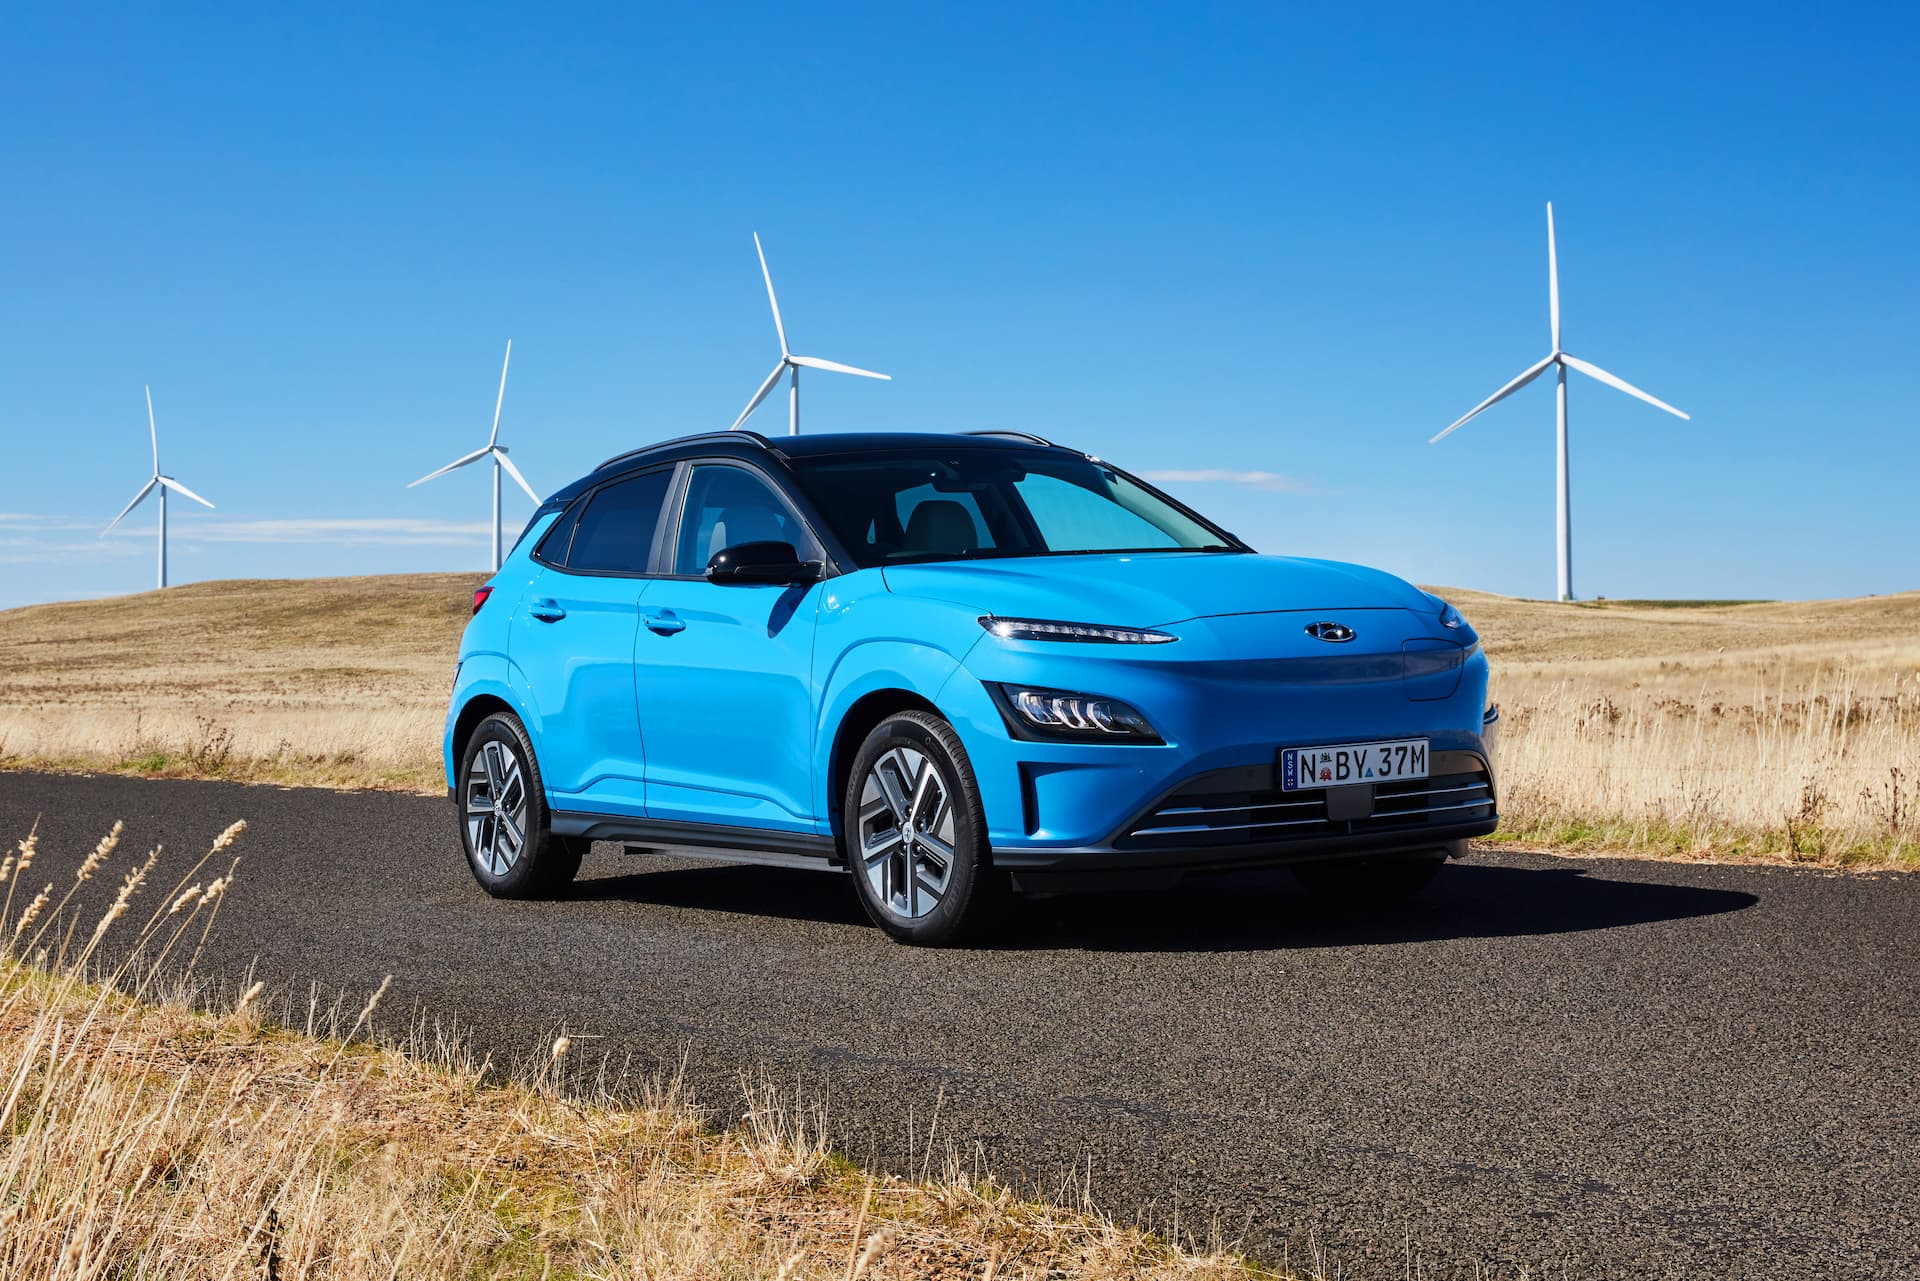 Blue Hyundai Kona Electric SUV in front of windmills